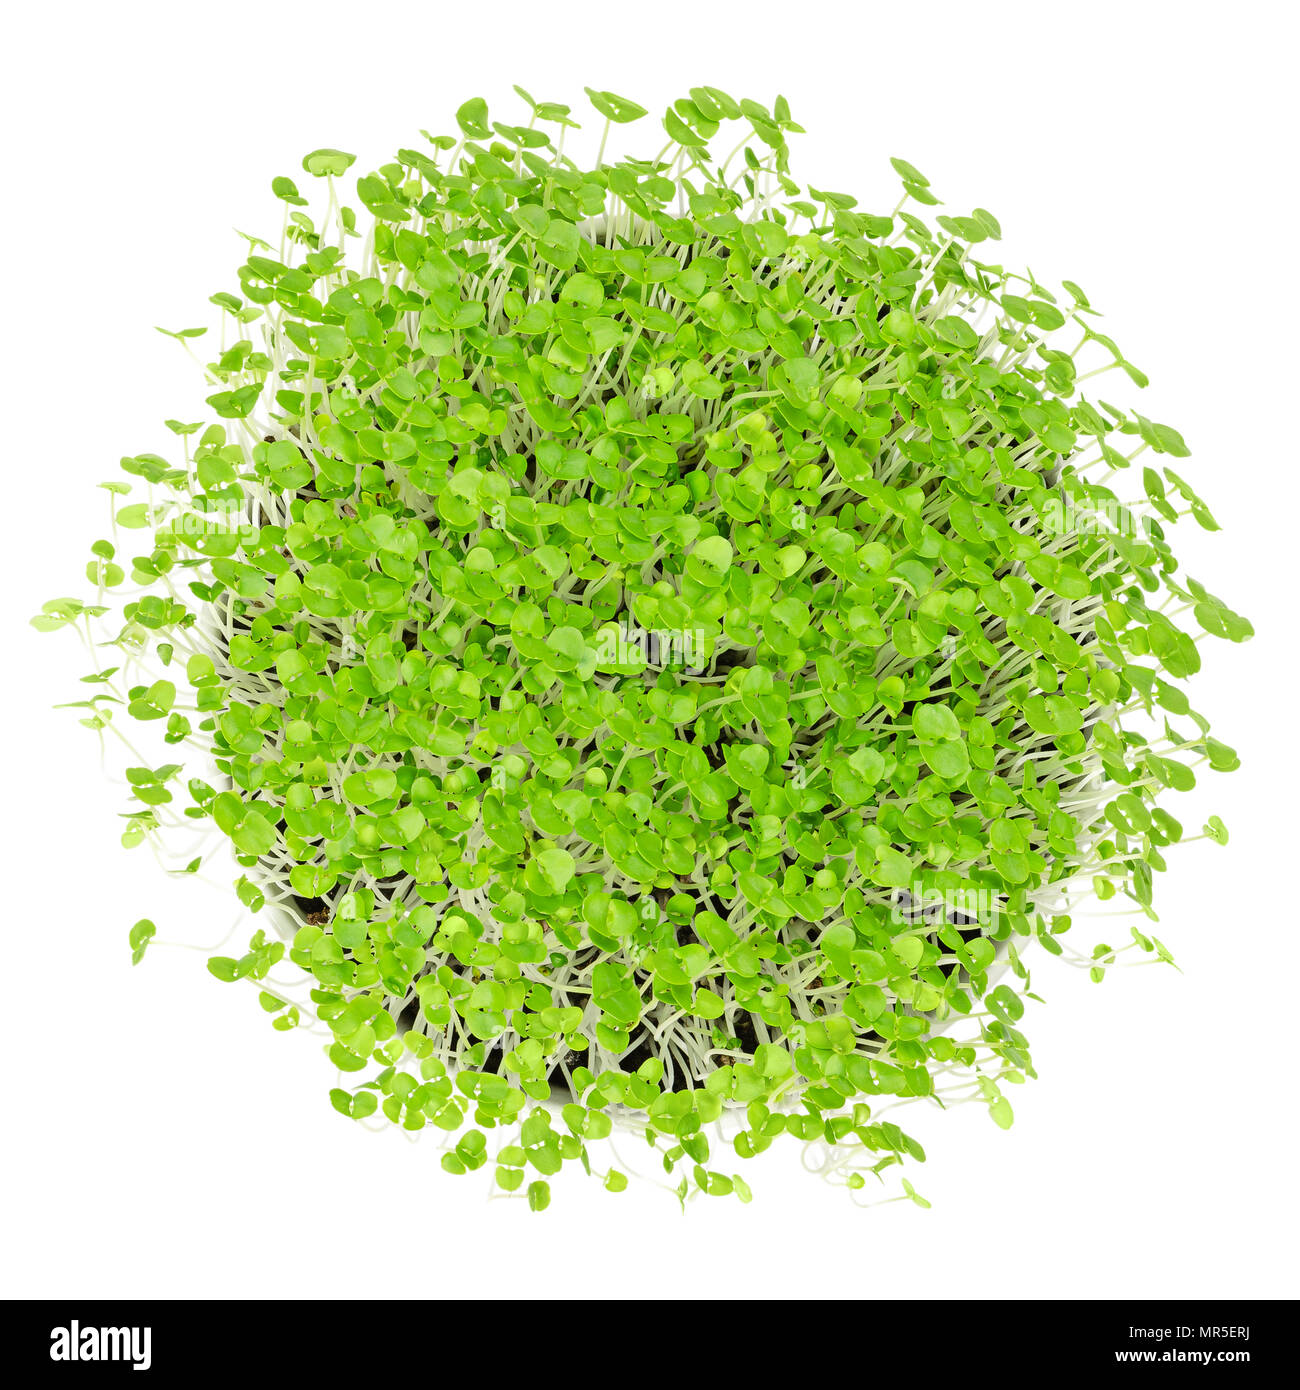 Young basil microgreens in white bowl over white. Sprouts, shoots, young plants and seedlings in potting compost. Leaves of Ocimum basilicum. Photo. Stock Photo